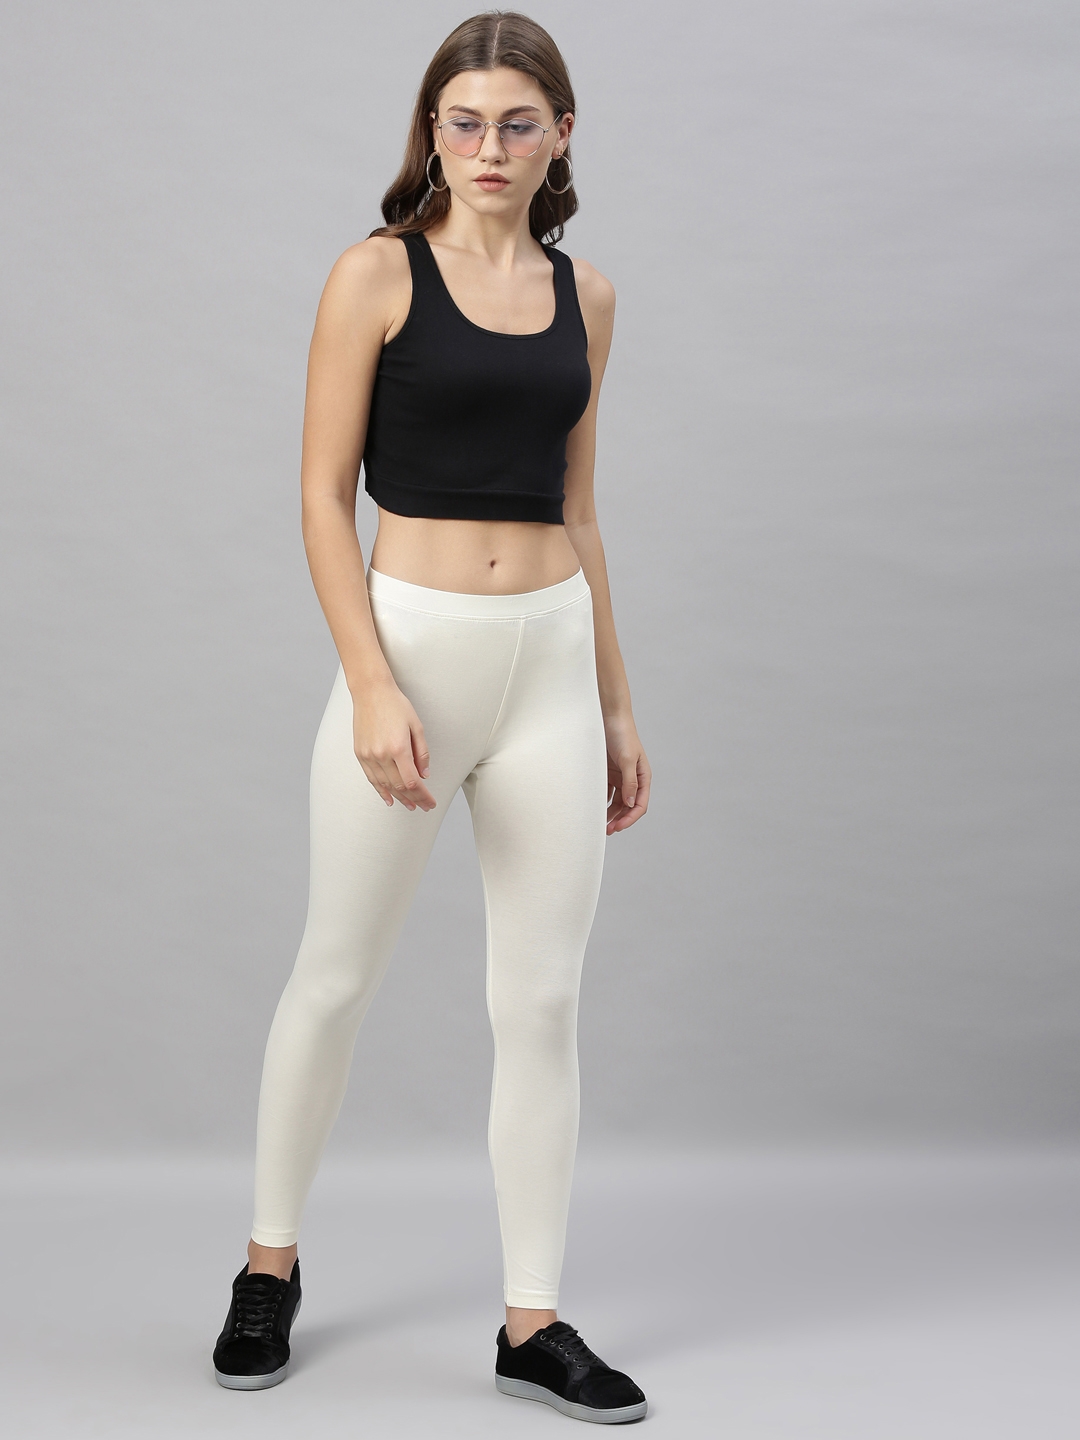 Kryptic | Kryptic Women's Cotton Stretch Solid Ankle Length Leggings 3